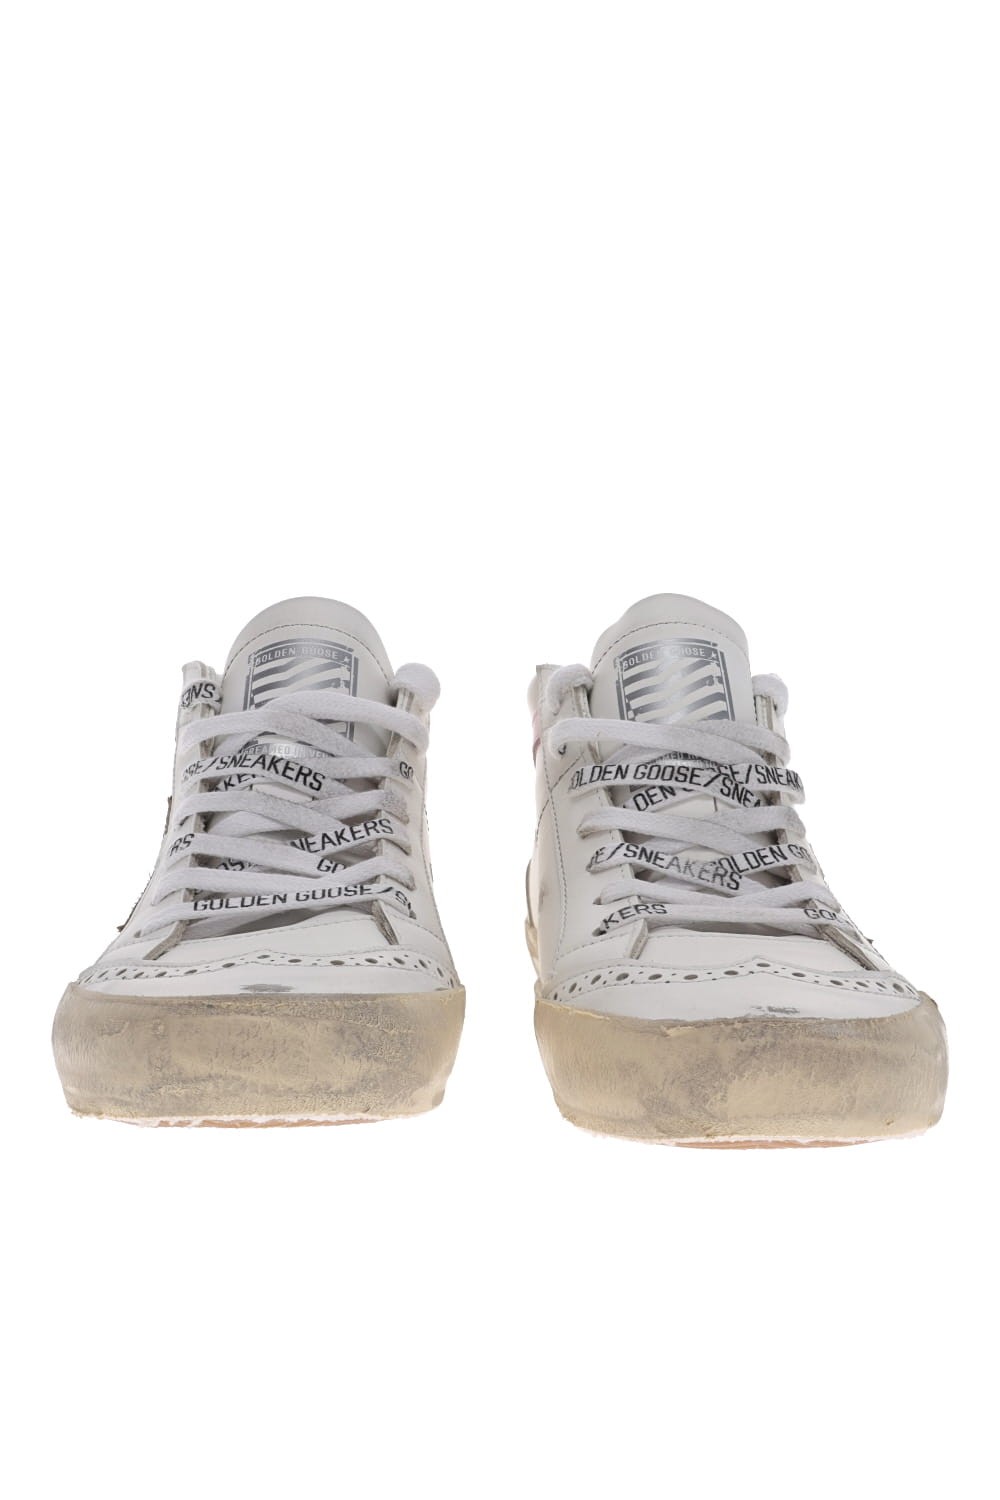 Golden Goose MID STAR LEATHER UPPER AND WAVE LAMINATED STAR GWF00122.F005413.11115 WHITE/SILVER/PINK